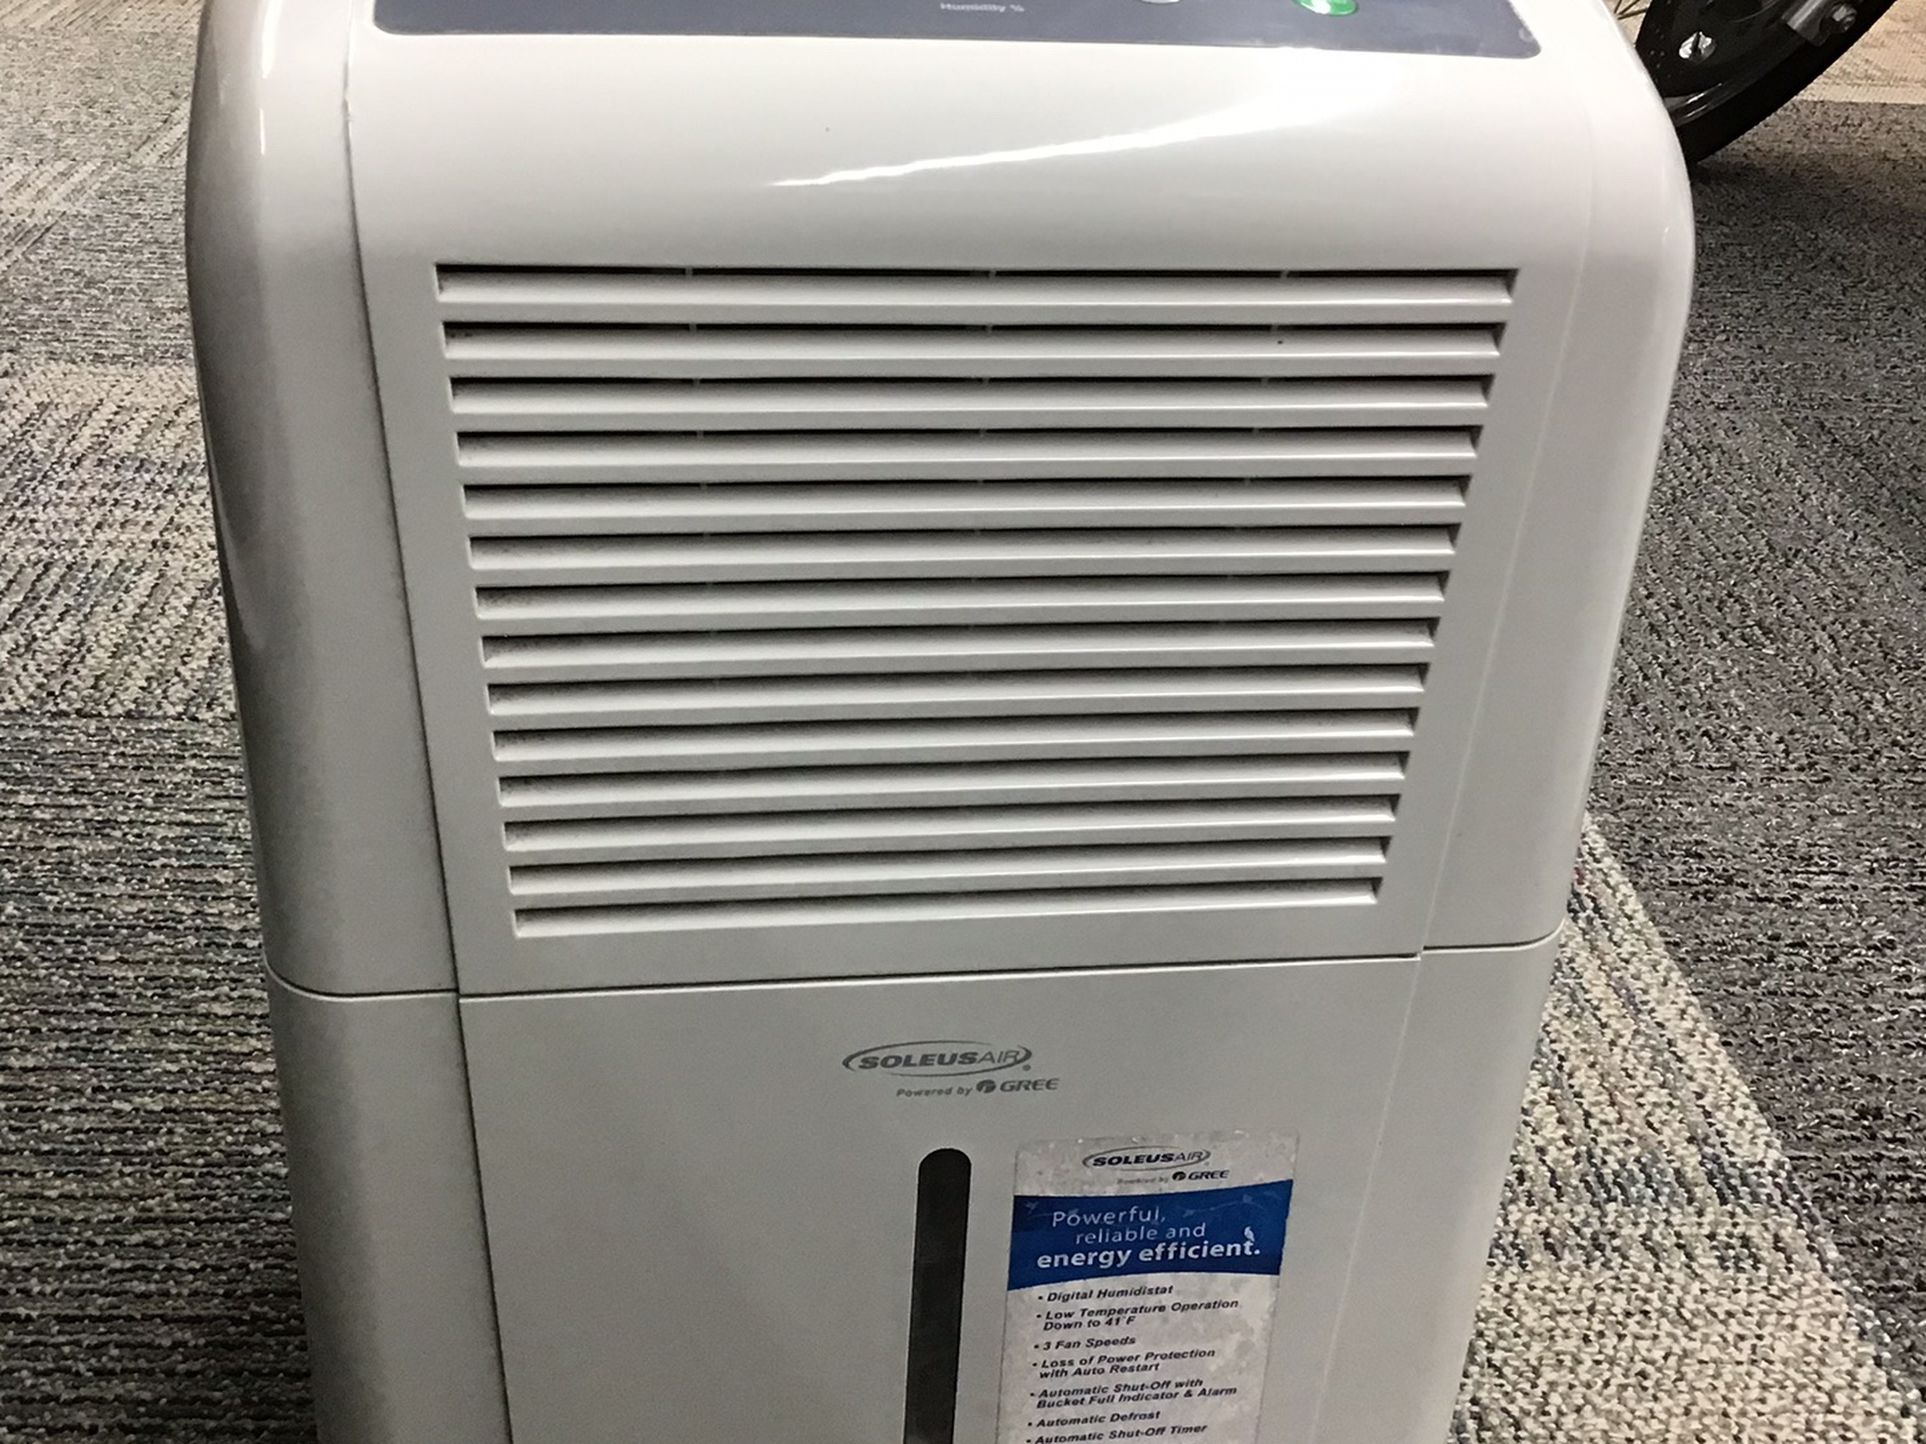 Soleus Powered by Gree DRP 30-PT Dehumidifier 